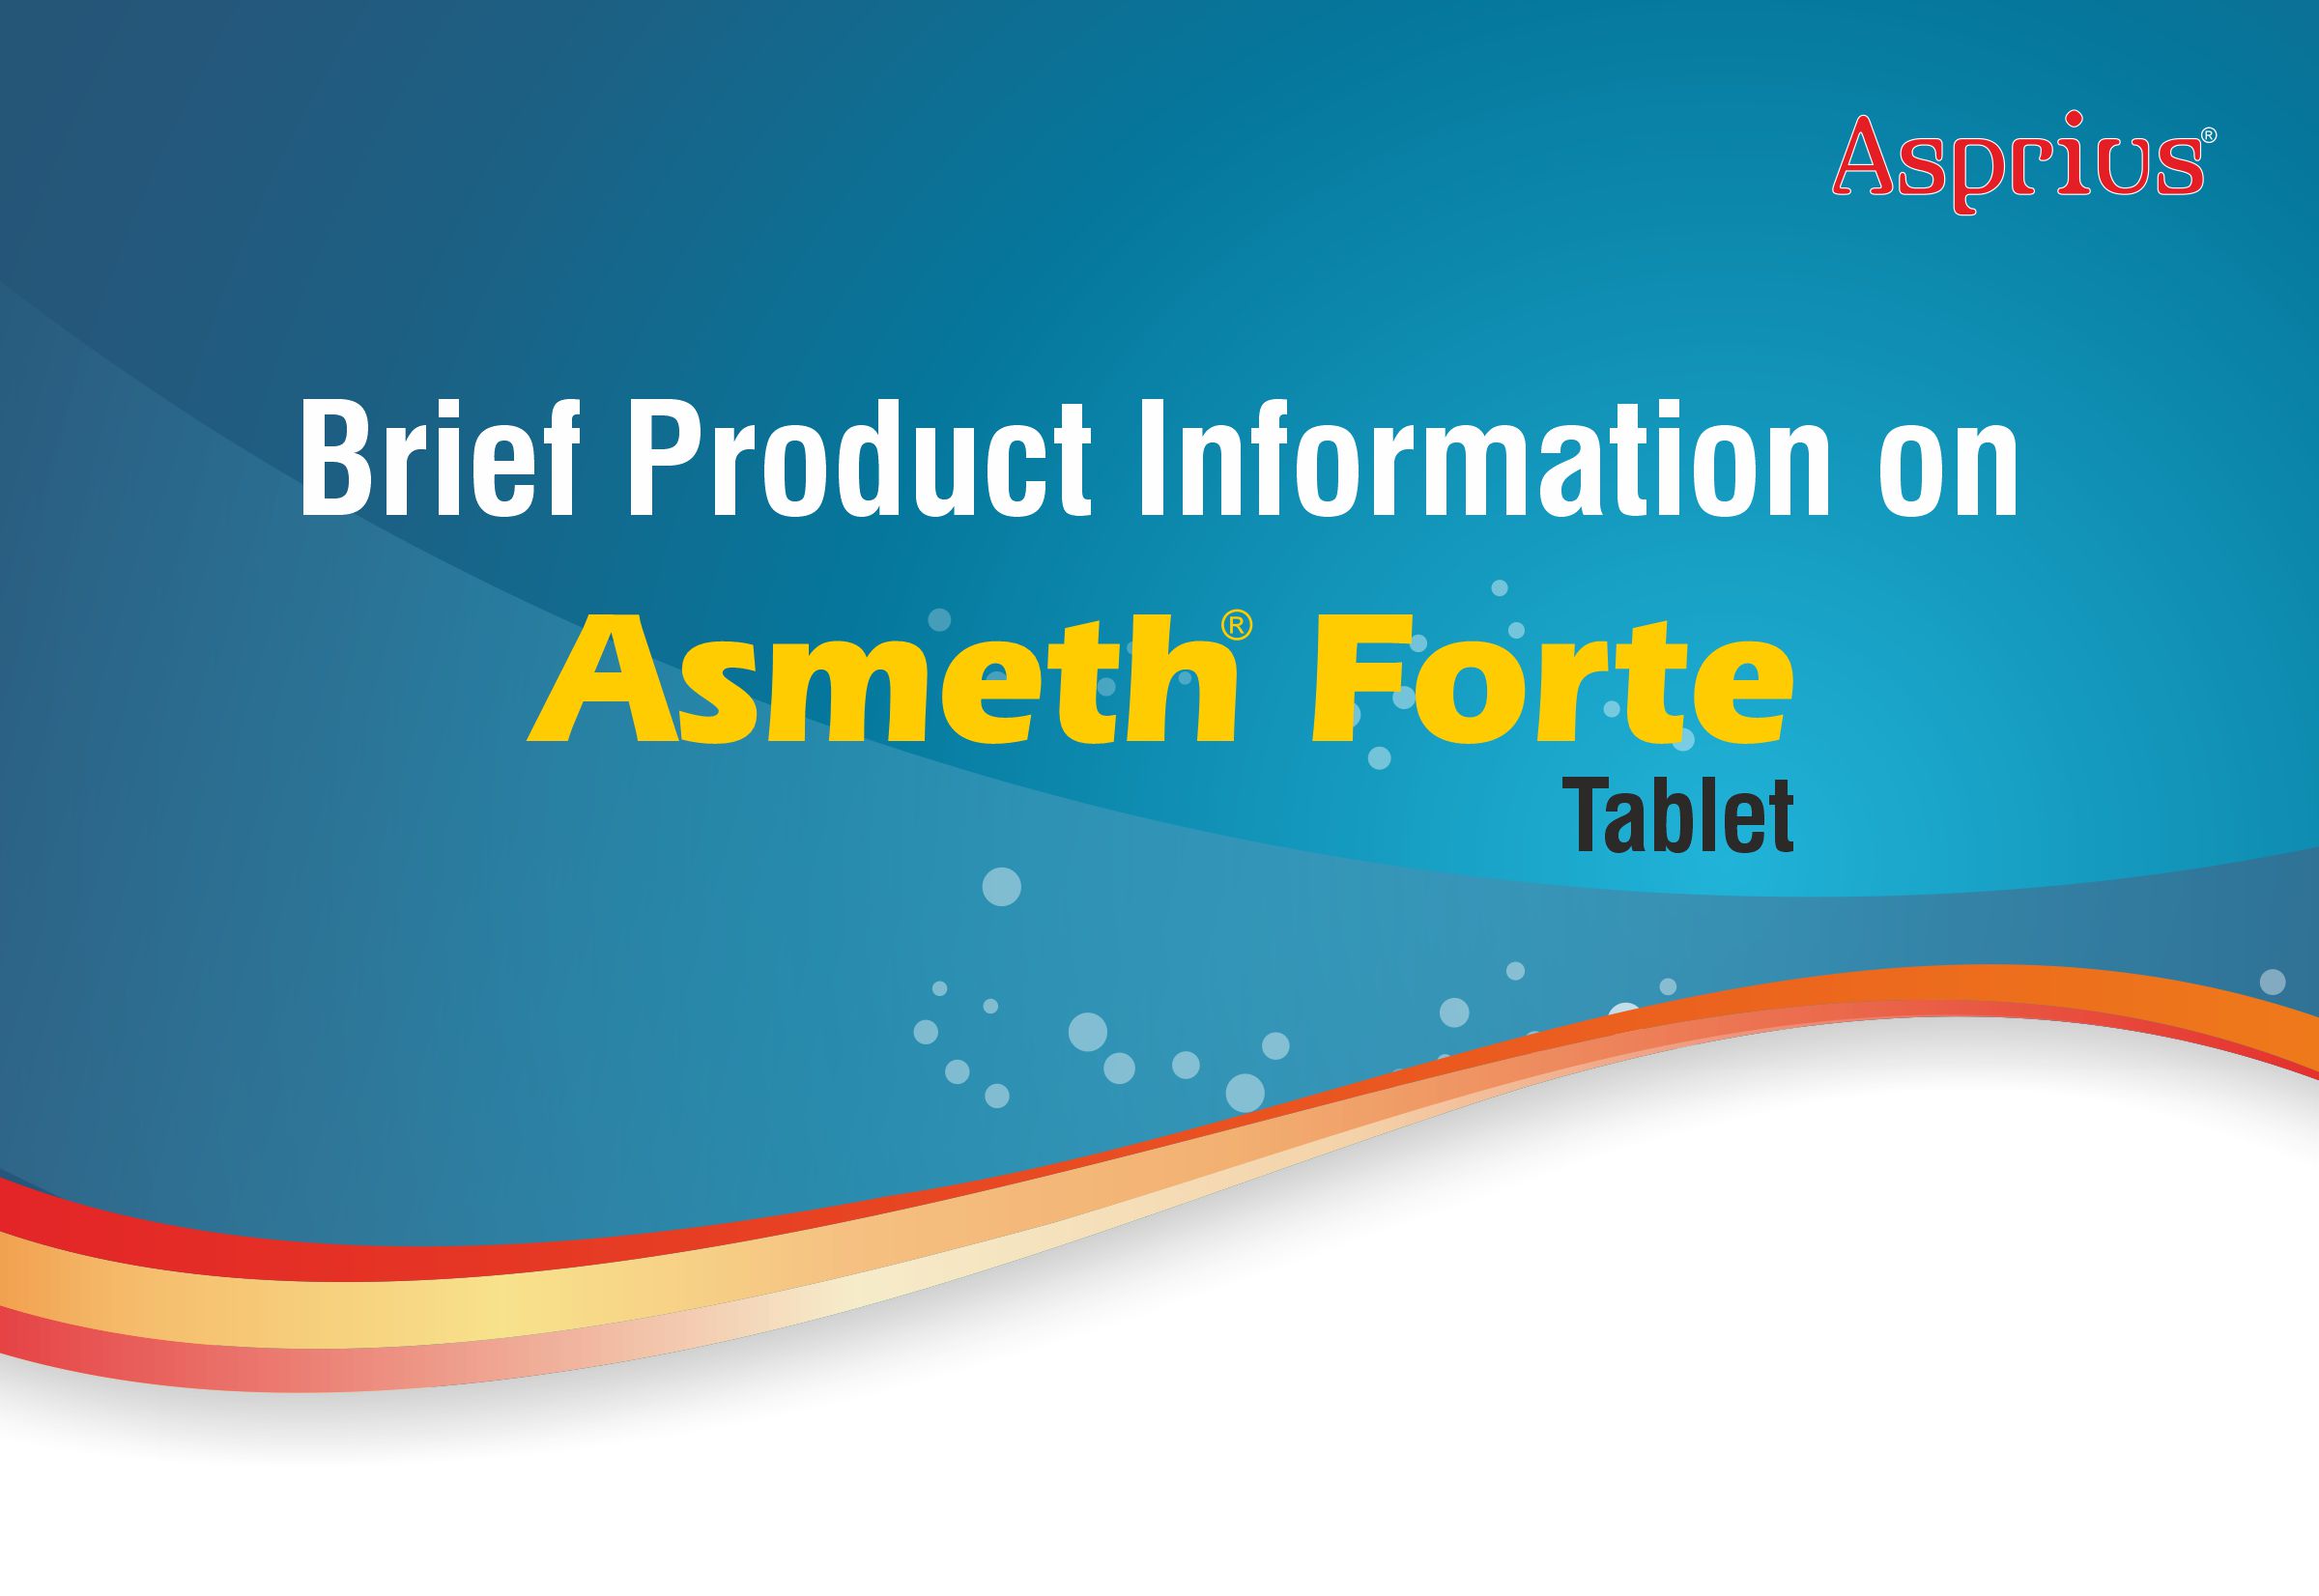 Brief Product Information on ASMETH FORTE Tablet